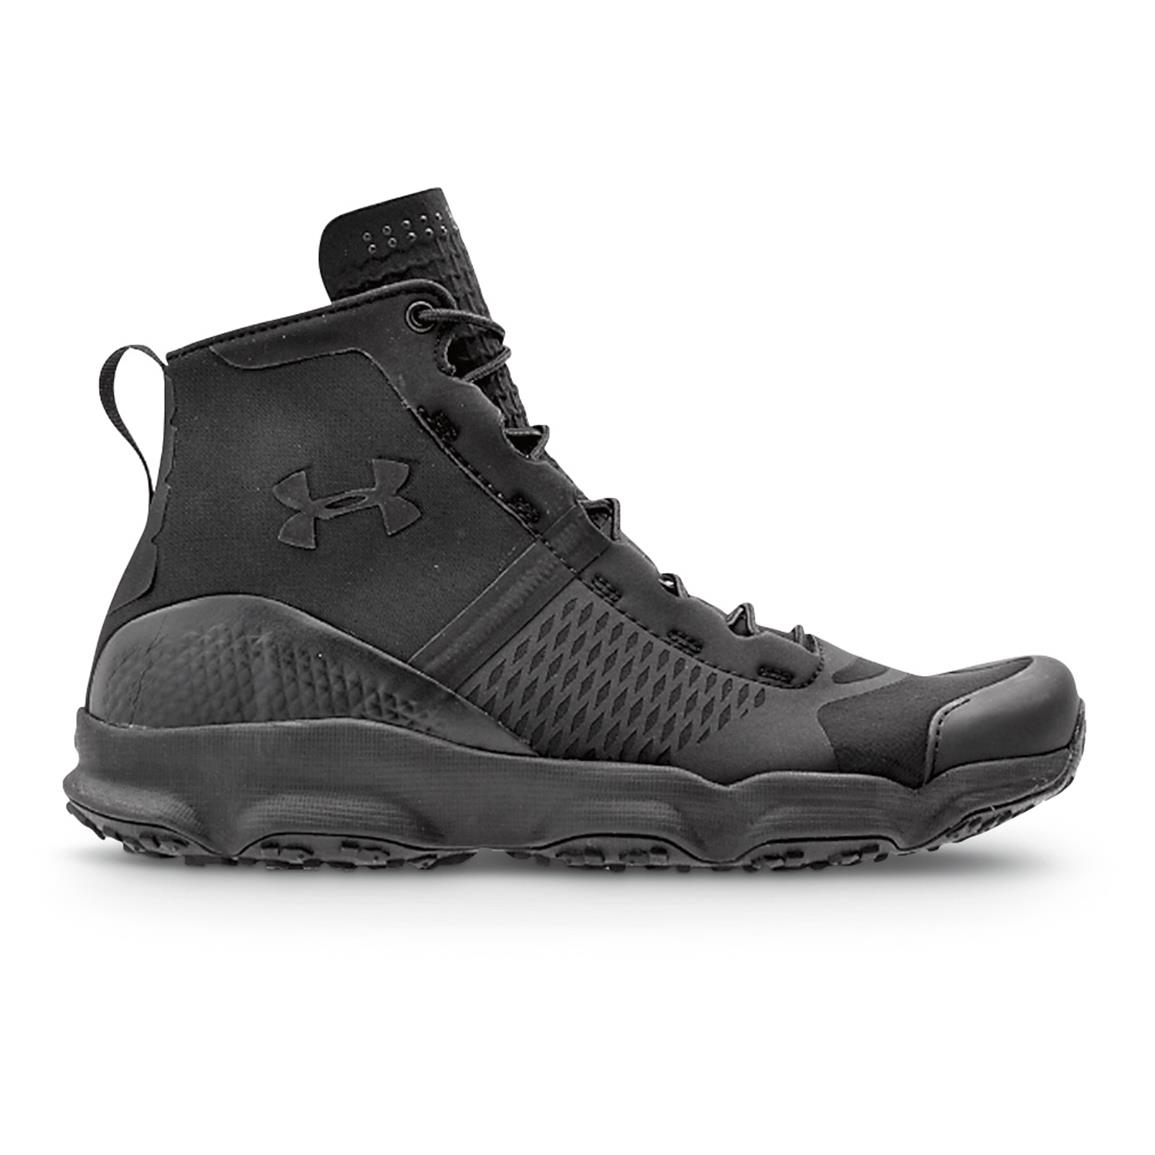 Under Armour Men's SpeedFit Mid Hiking Boots 663907, Hiking Boots & Shoes at Sportsman's Guide